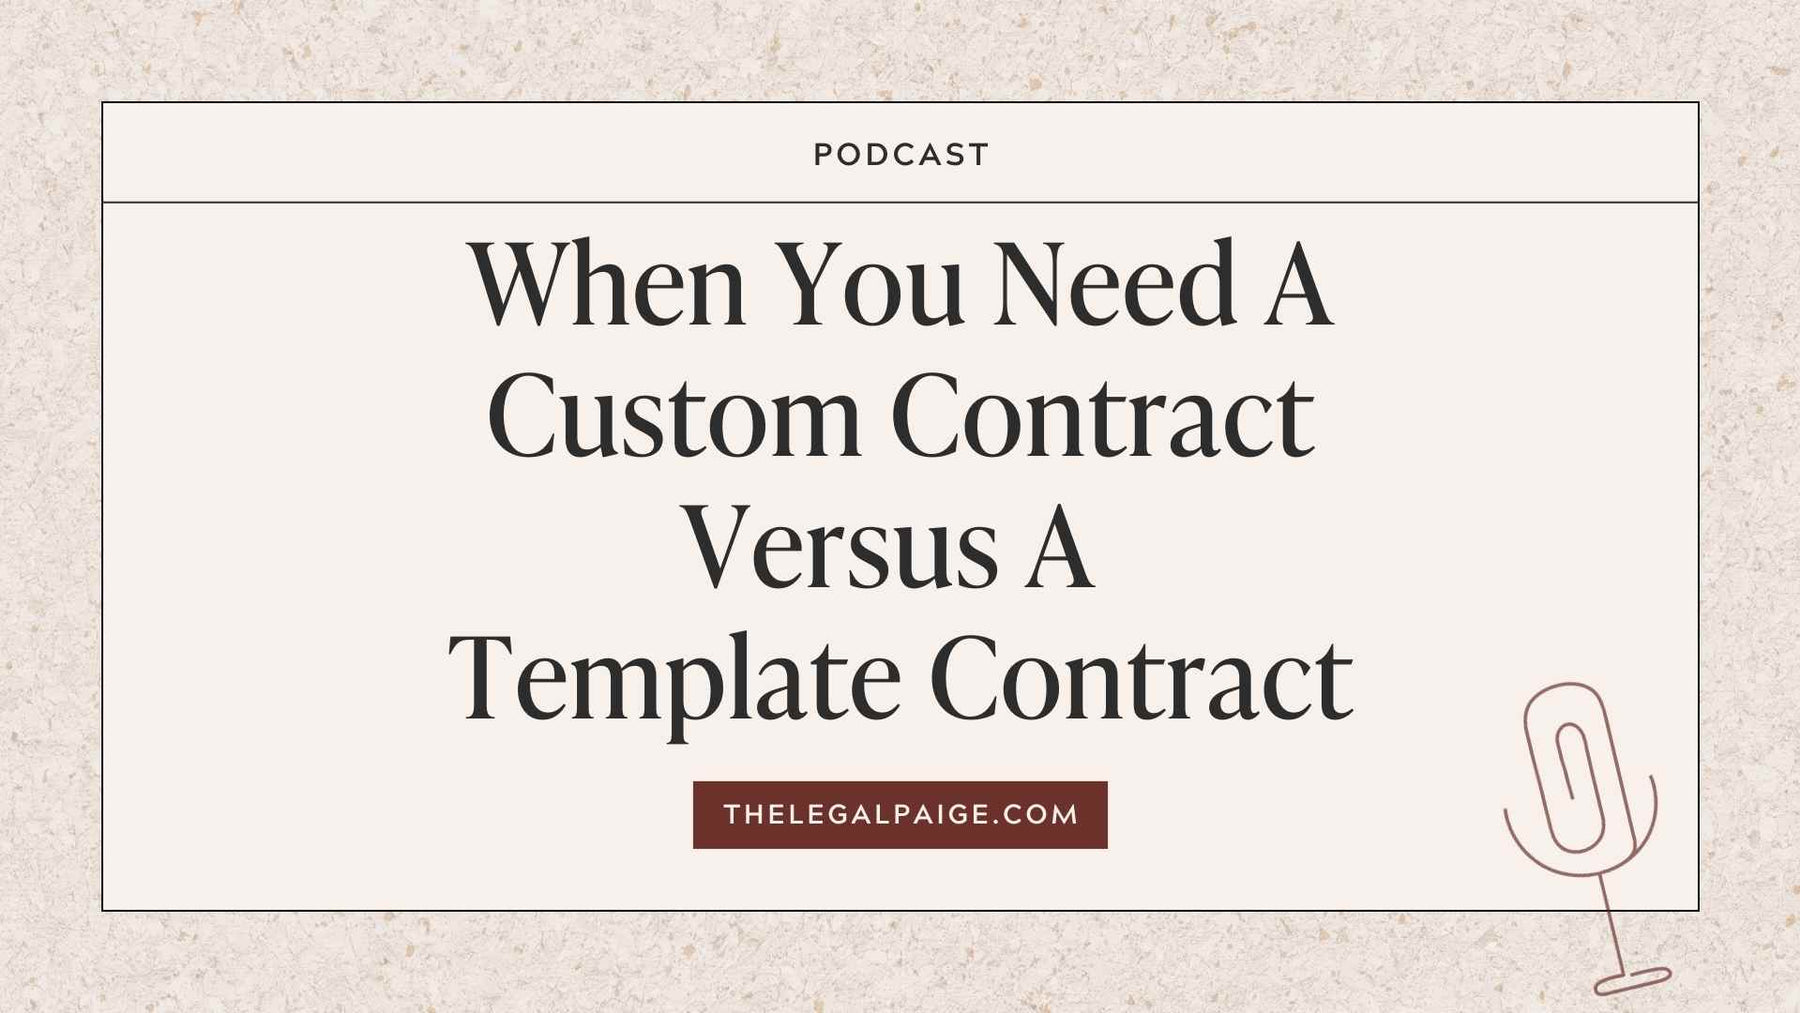 Episode 111: When You Need A Custom Contract Versus A Template Contract